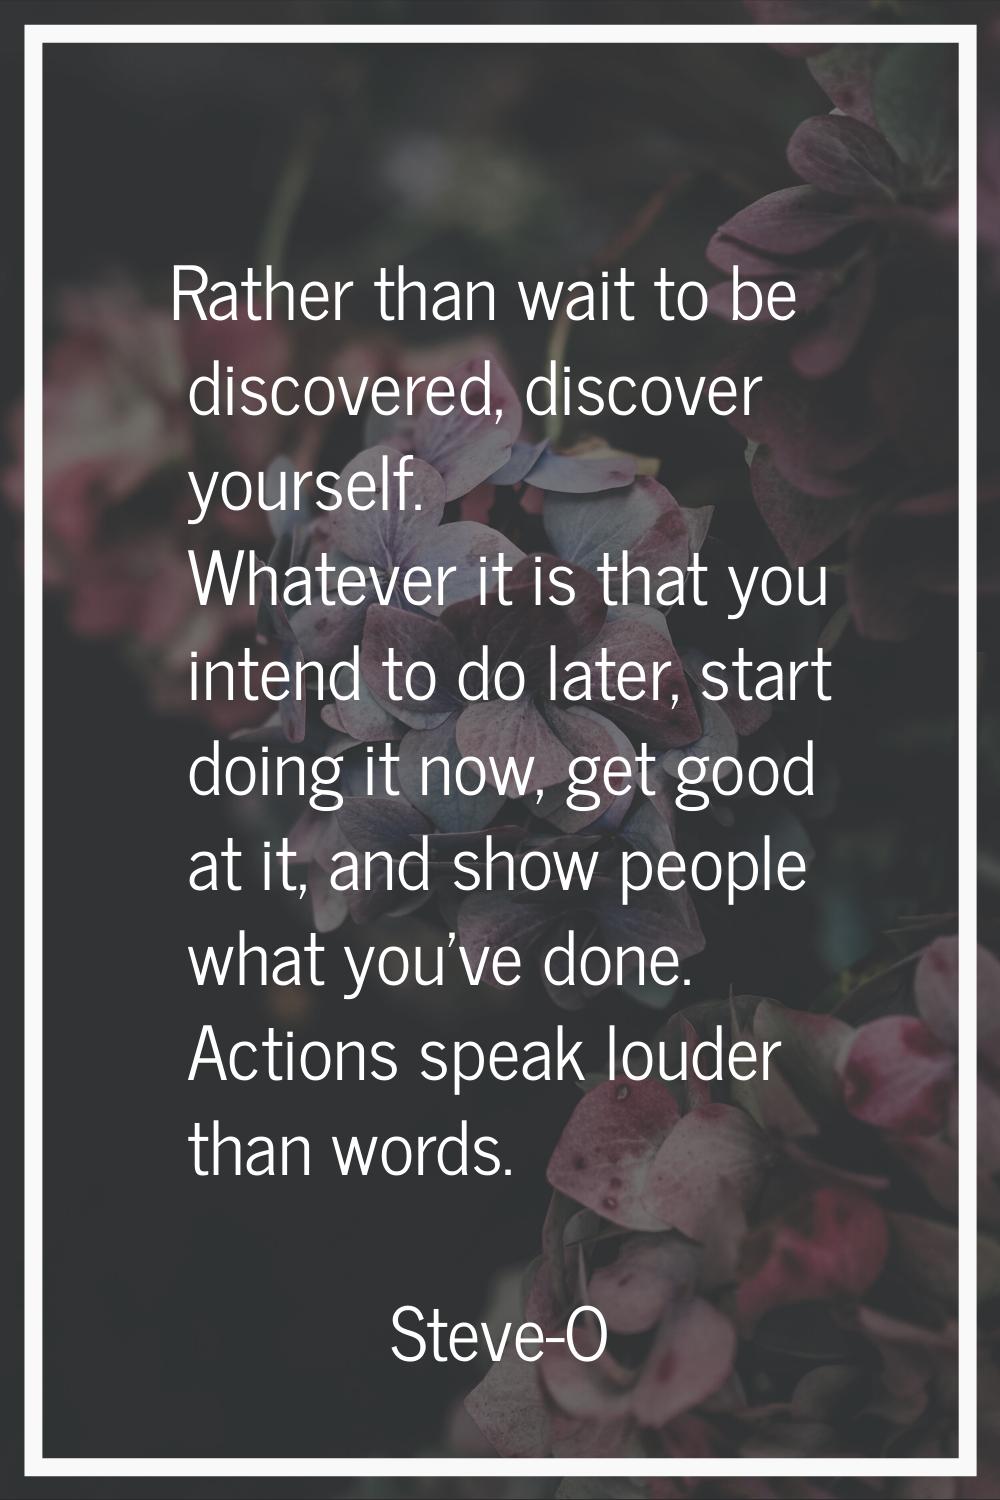 Rather than wait to be discovered, discover yourself. Whatever it is that you intend to do later, s